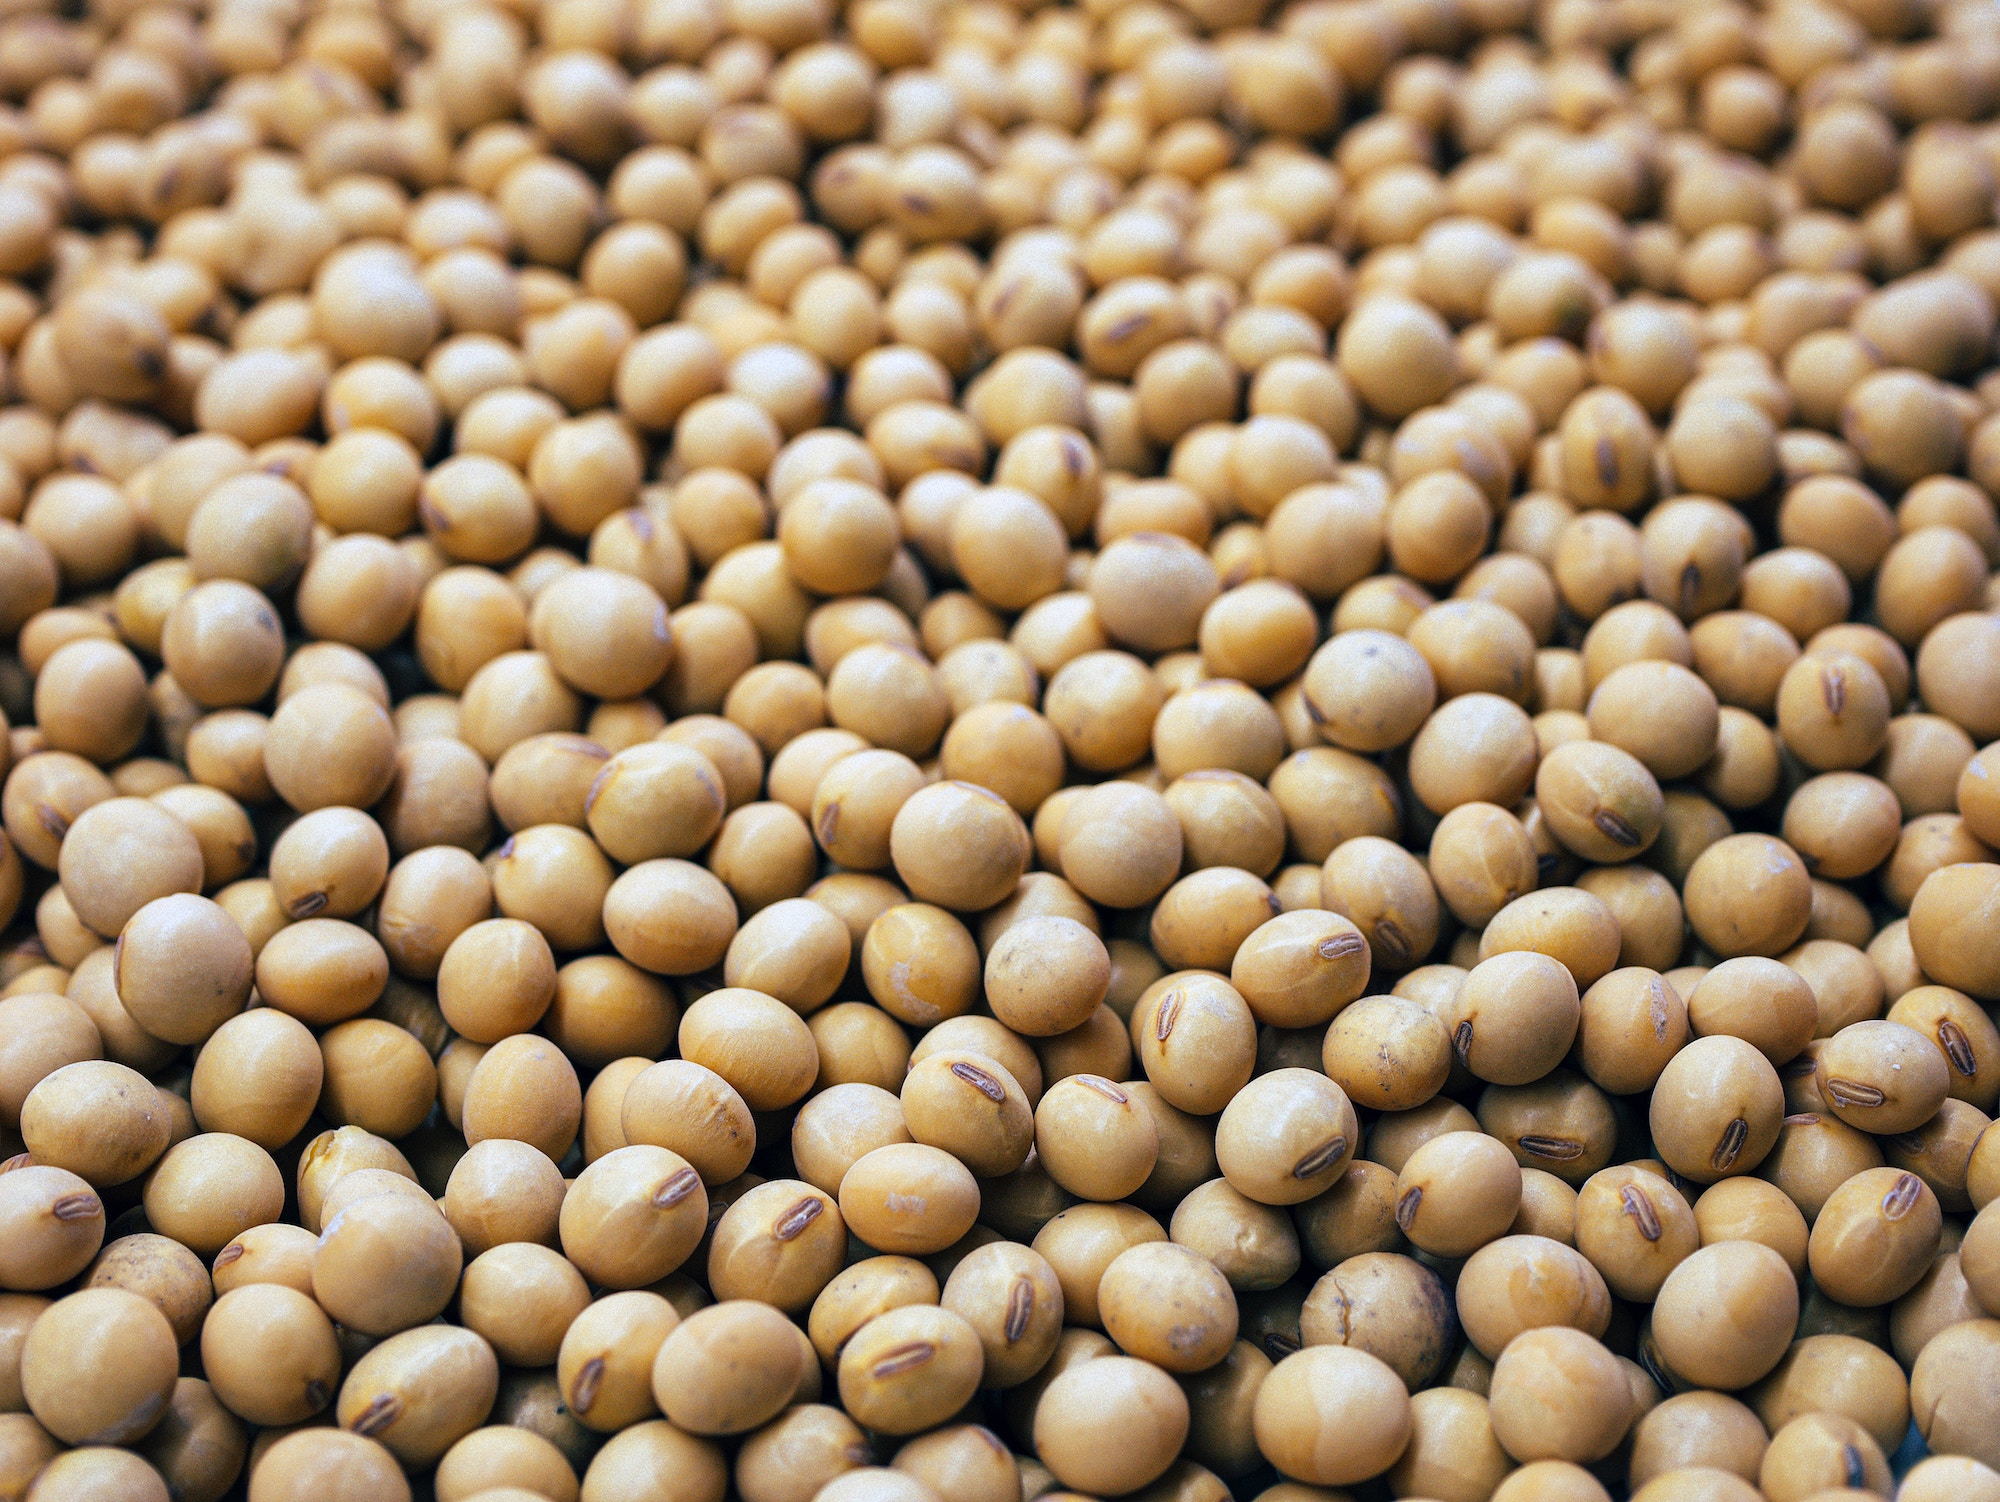 Brazilian agricultural exports soybeans